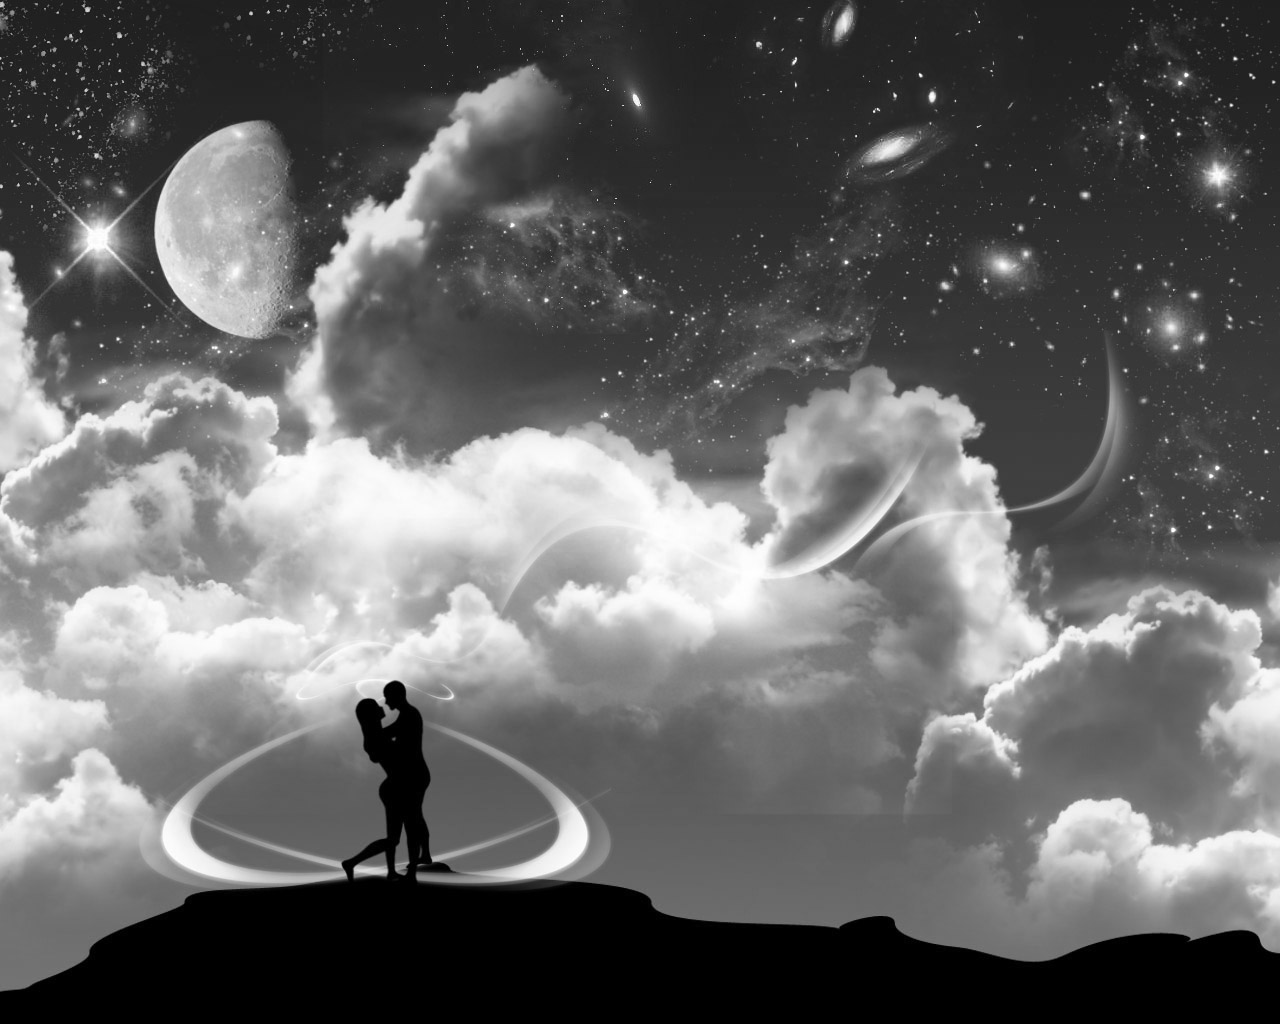 black and white romantic backgrounds